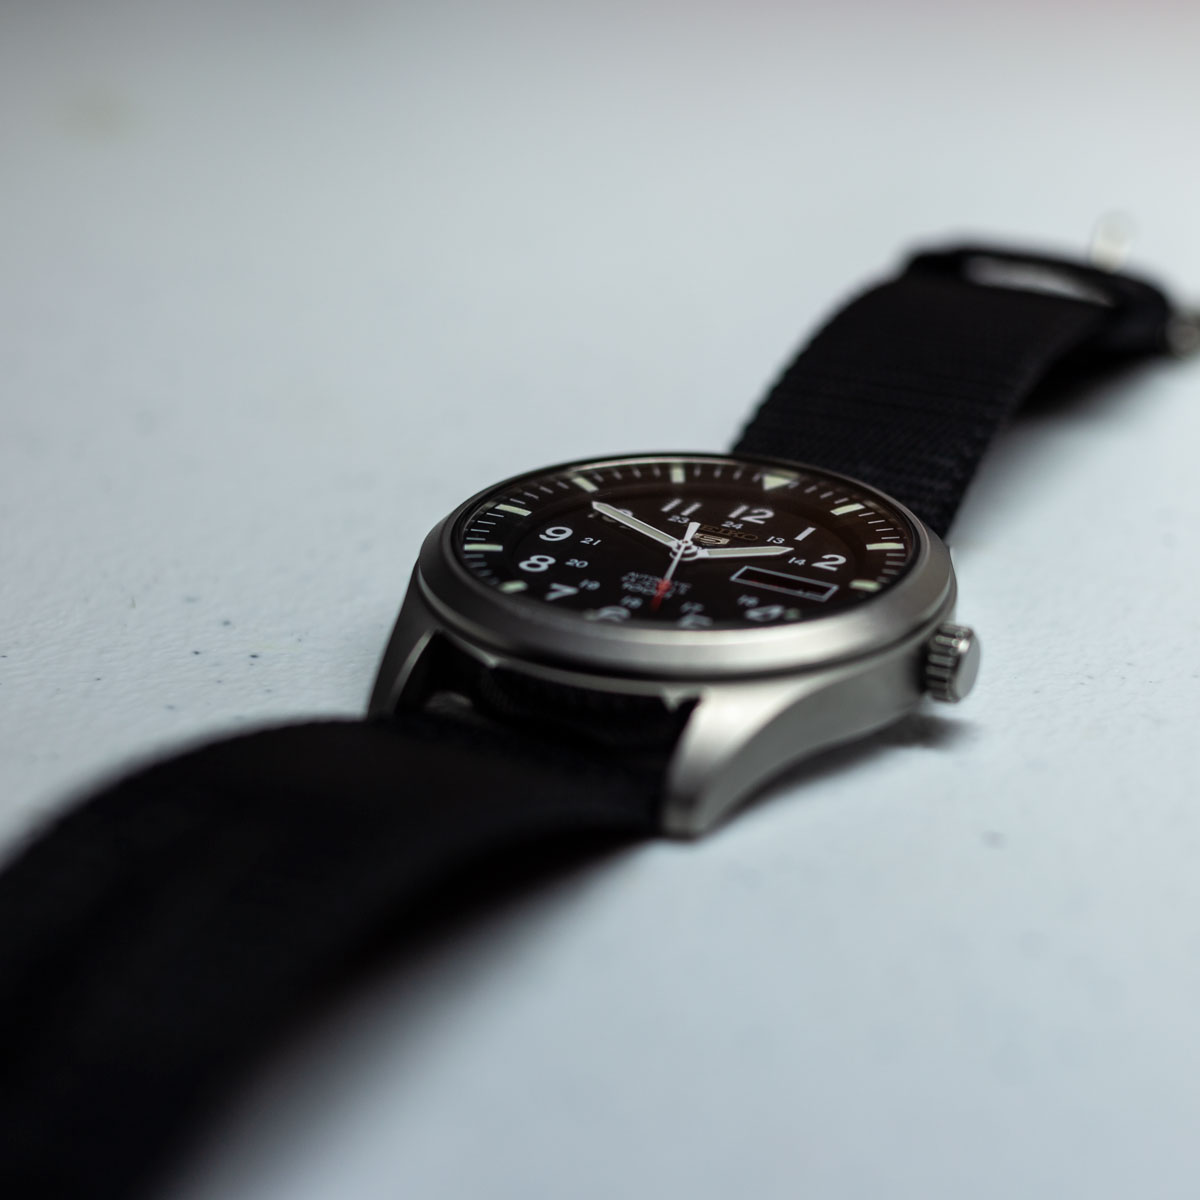 This image of a watch on a white background uses a low angle and shallow depth-of-field to give the watch an out of the ordinary look.